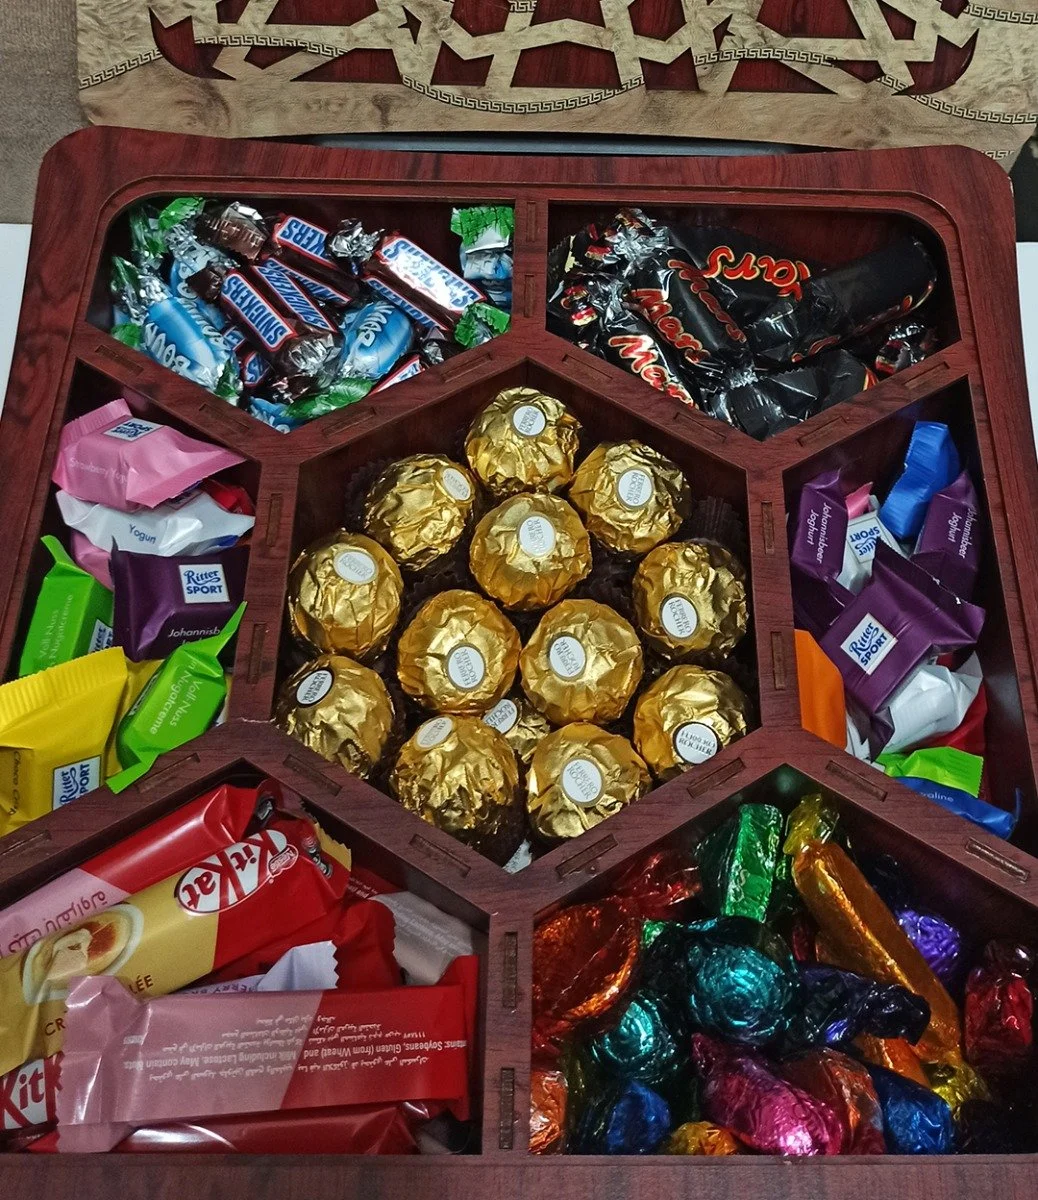 The Magnificent Chocolate Box